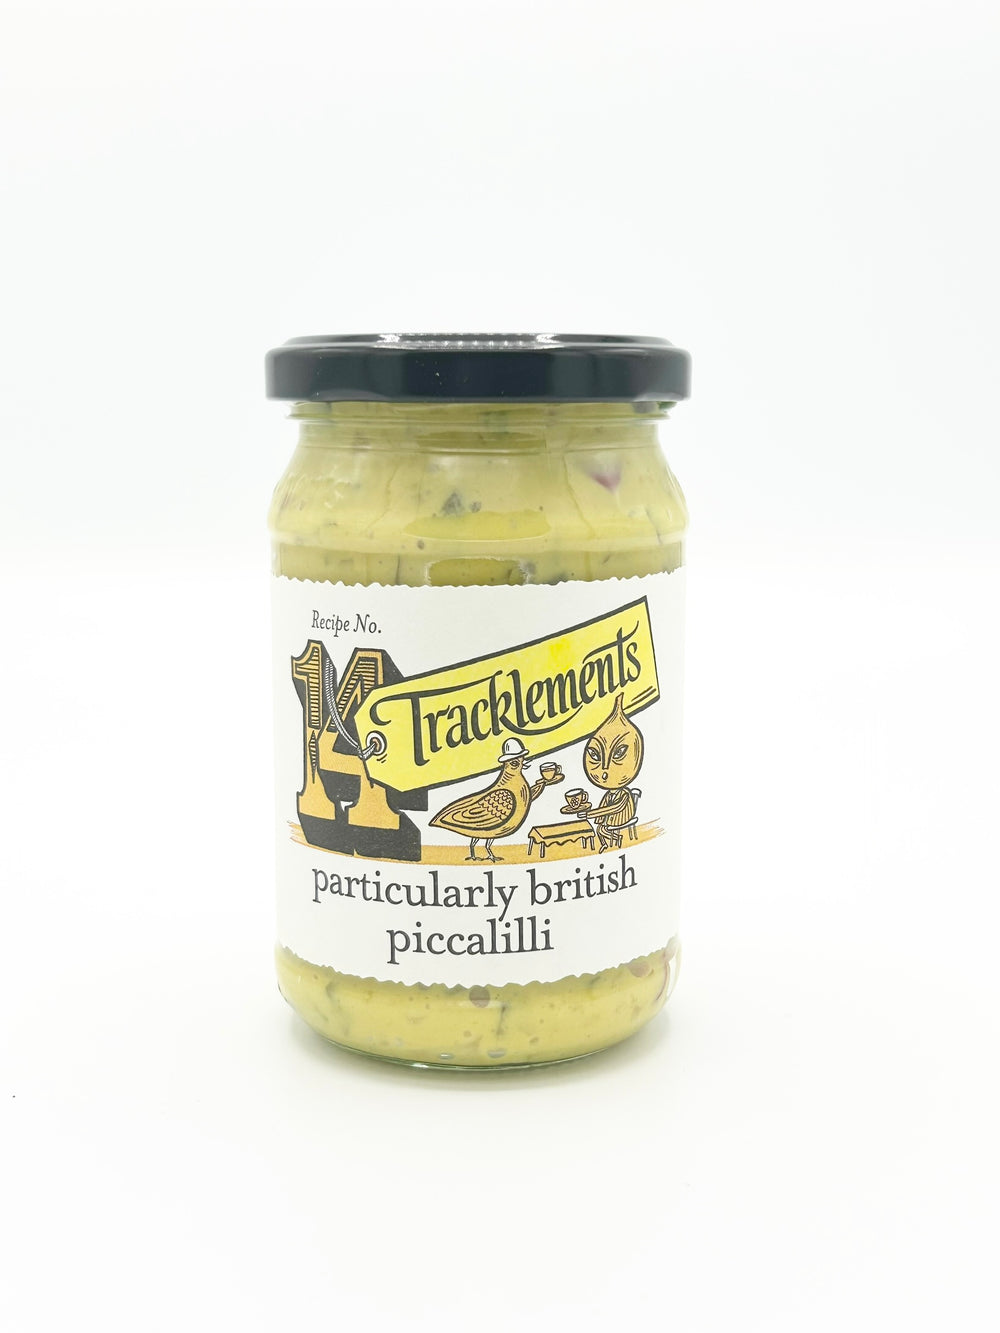 Tracklements Particularly British Piccalilli